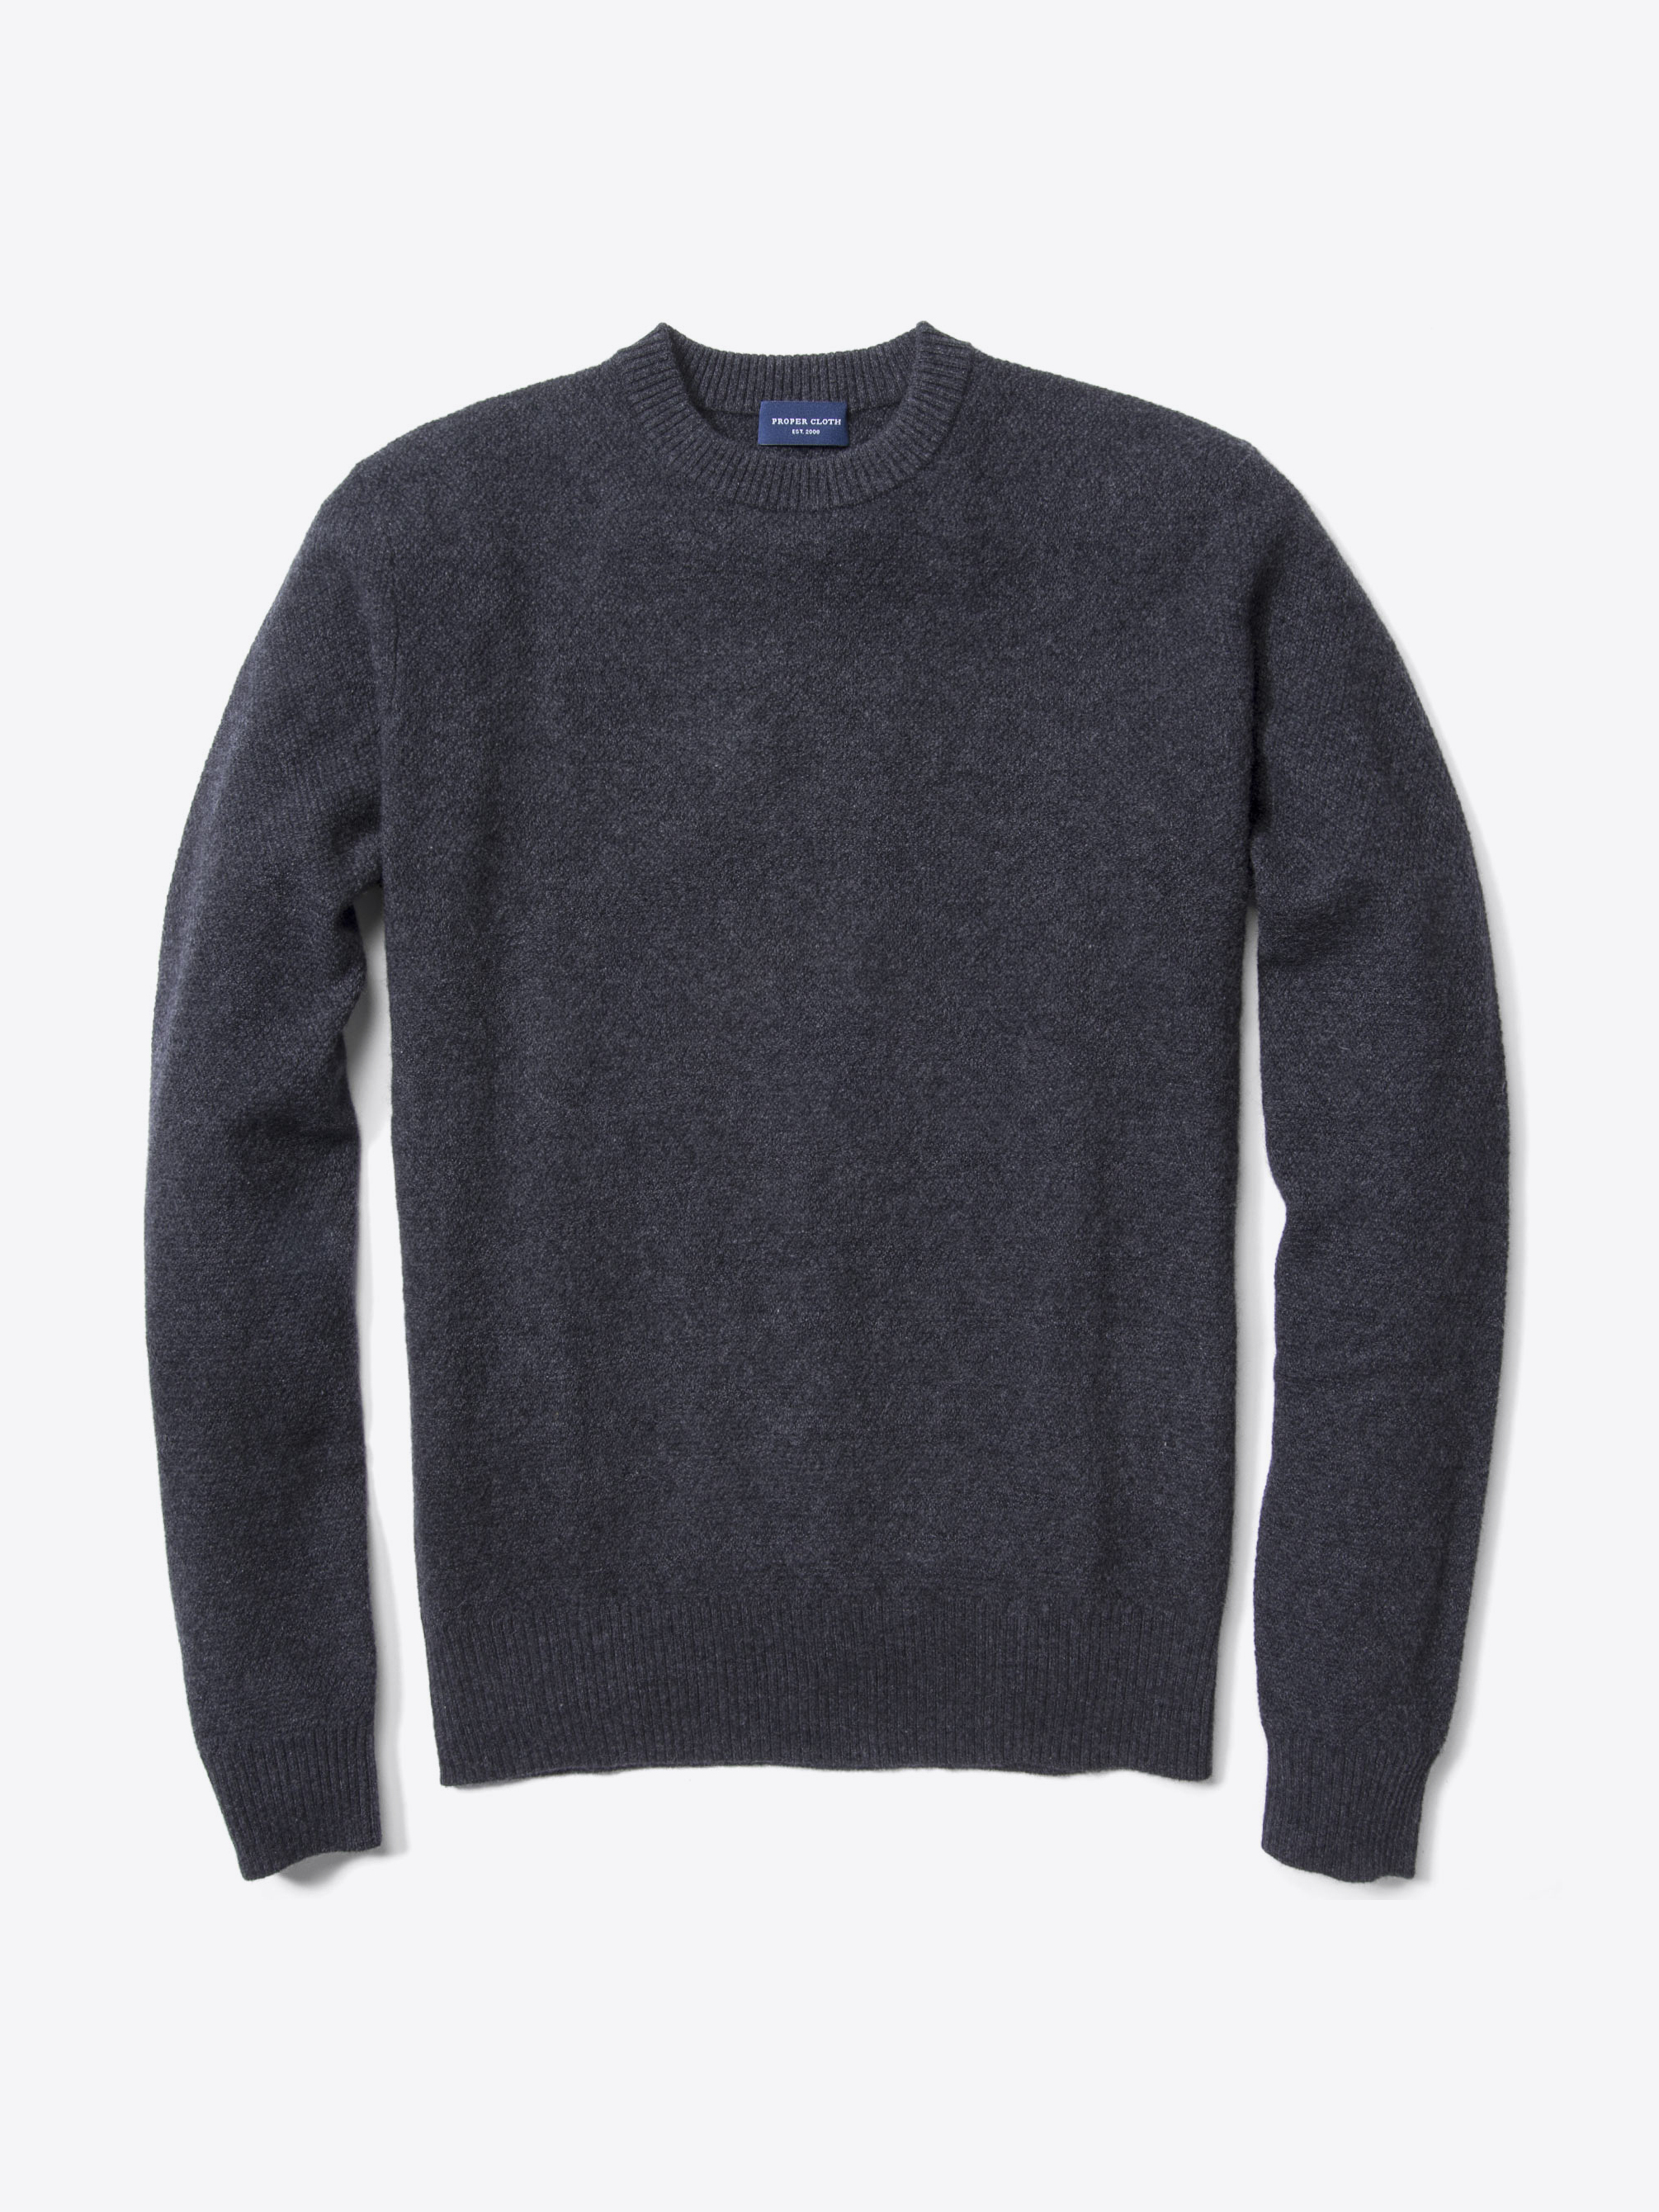 Zoom Image of Charcoal Cobble Stitch Cashmere Sweater